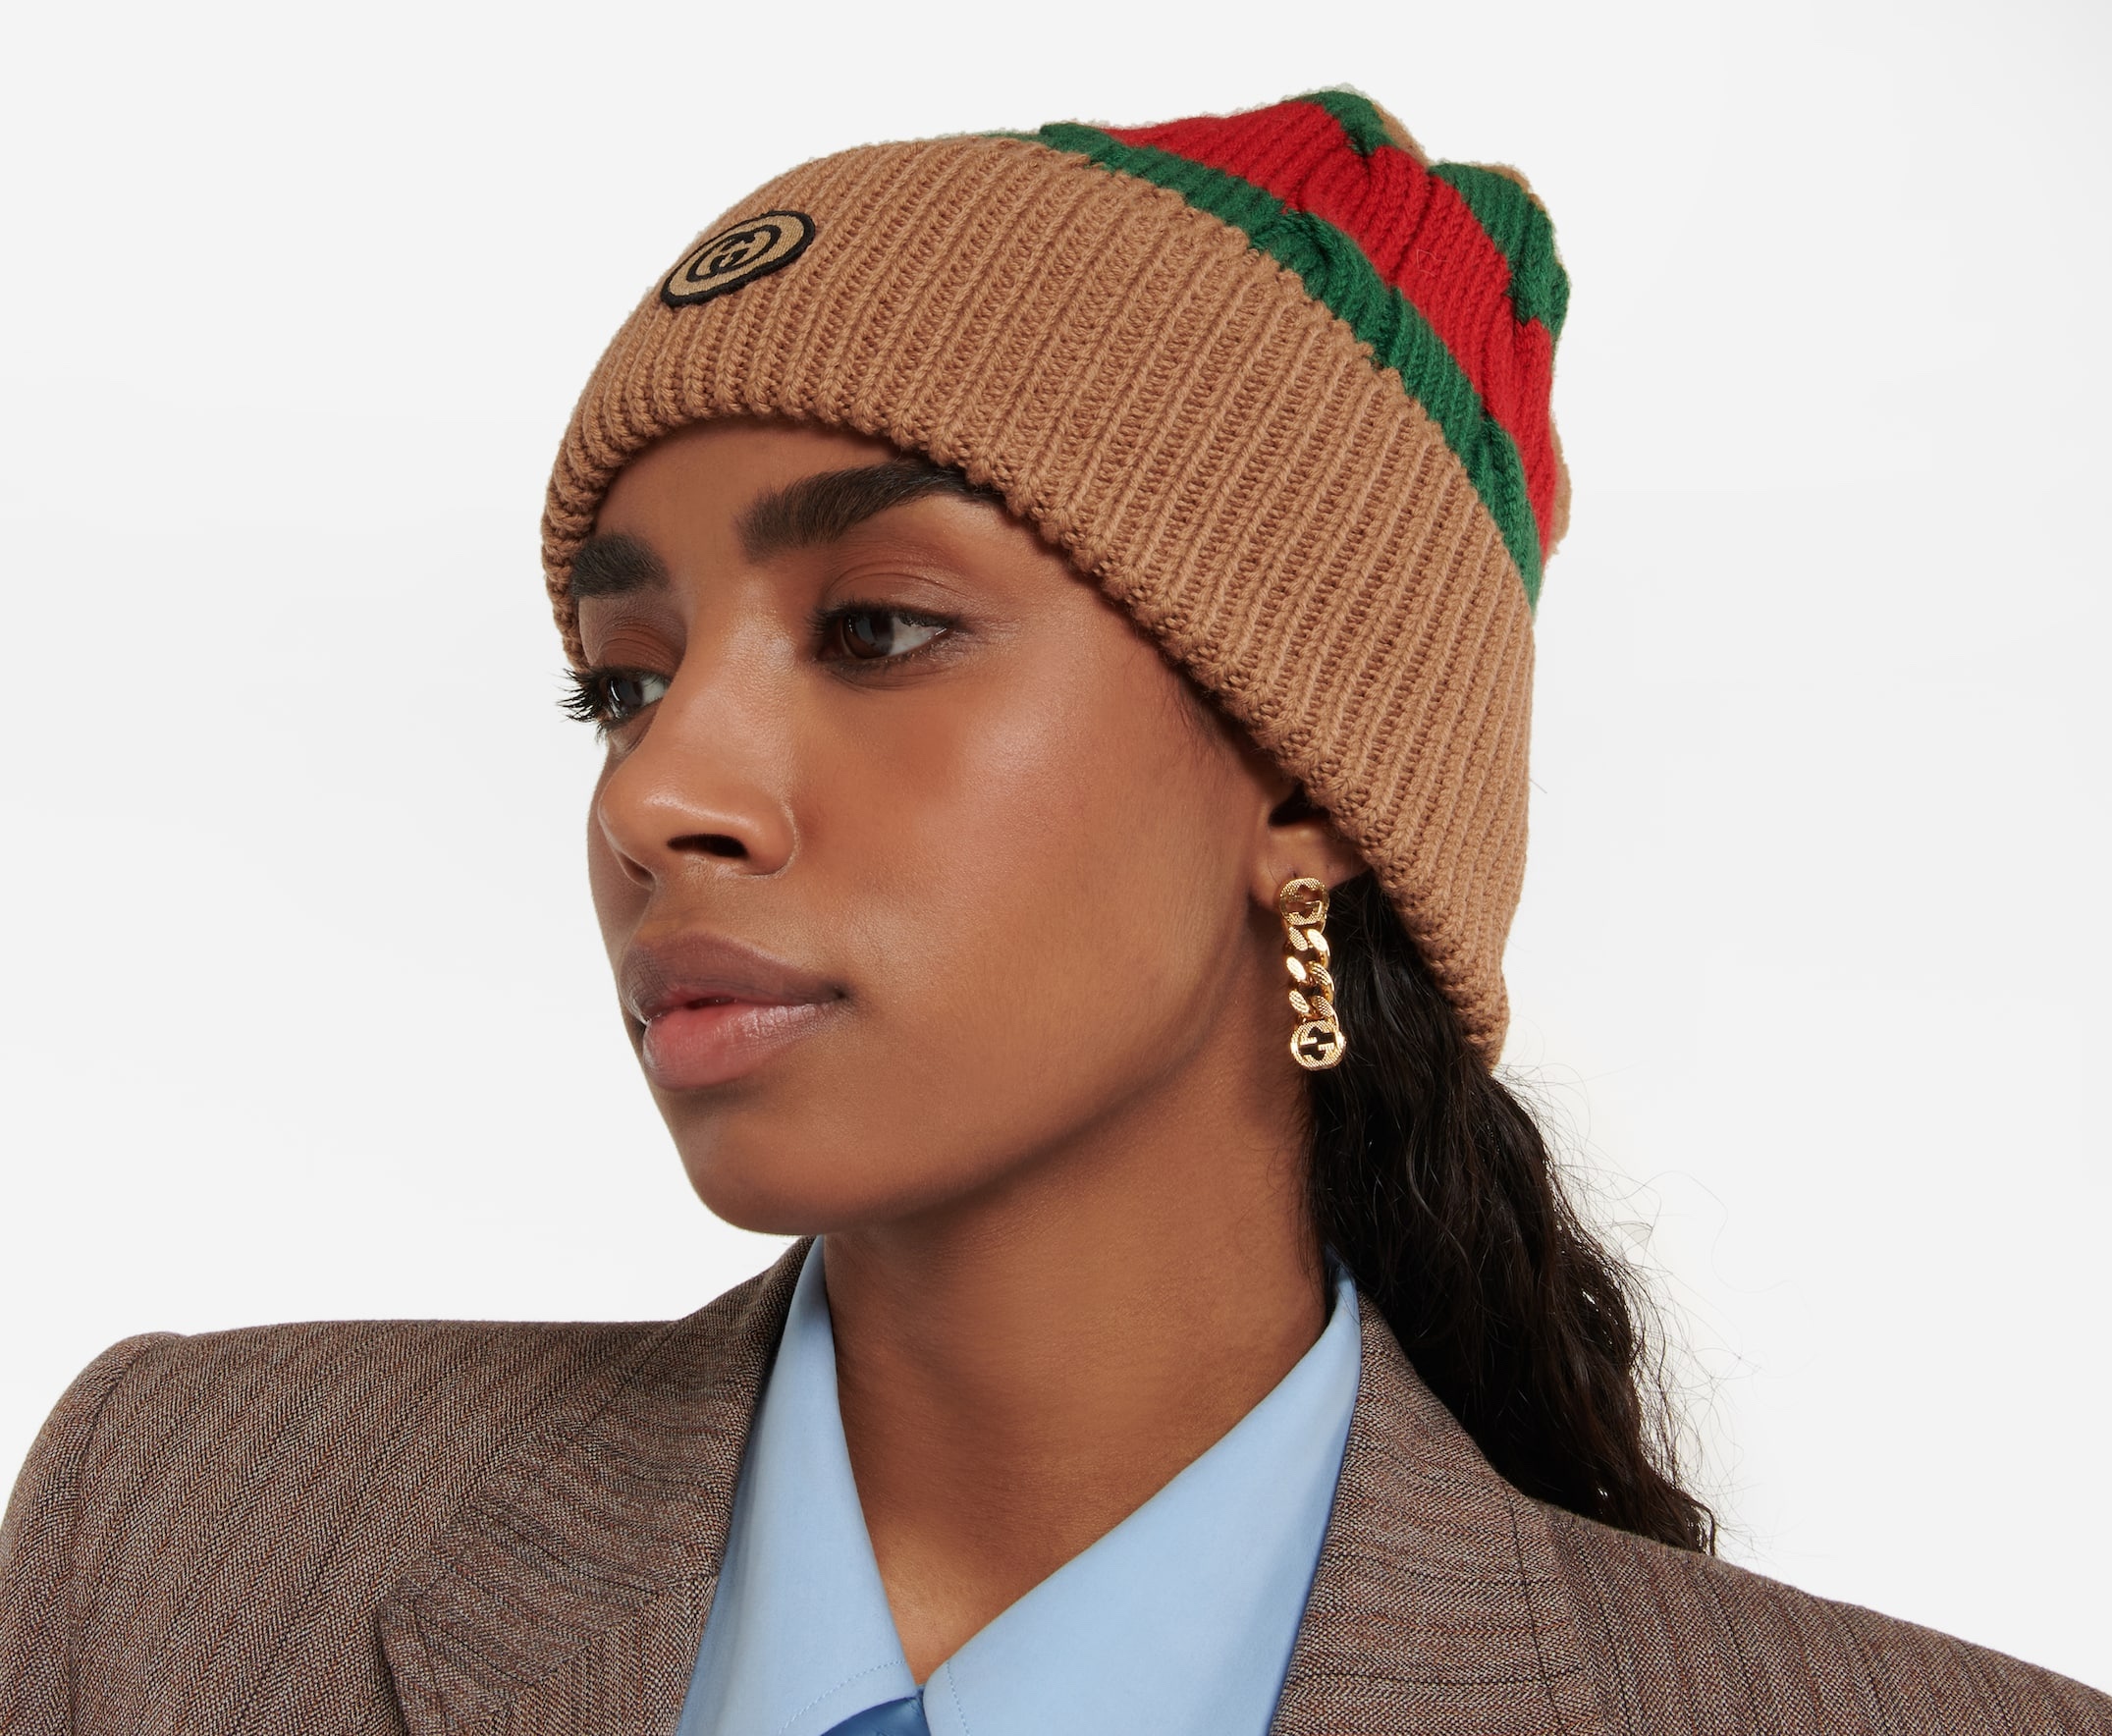 The 19 Best Designer Beanies To Invest in Right Now - RETAILBOSS